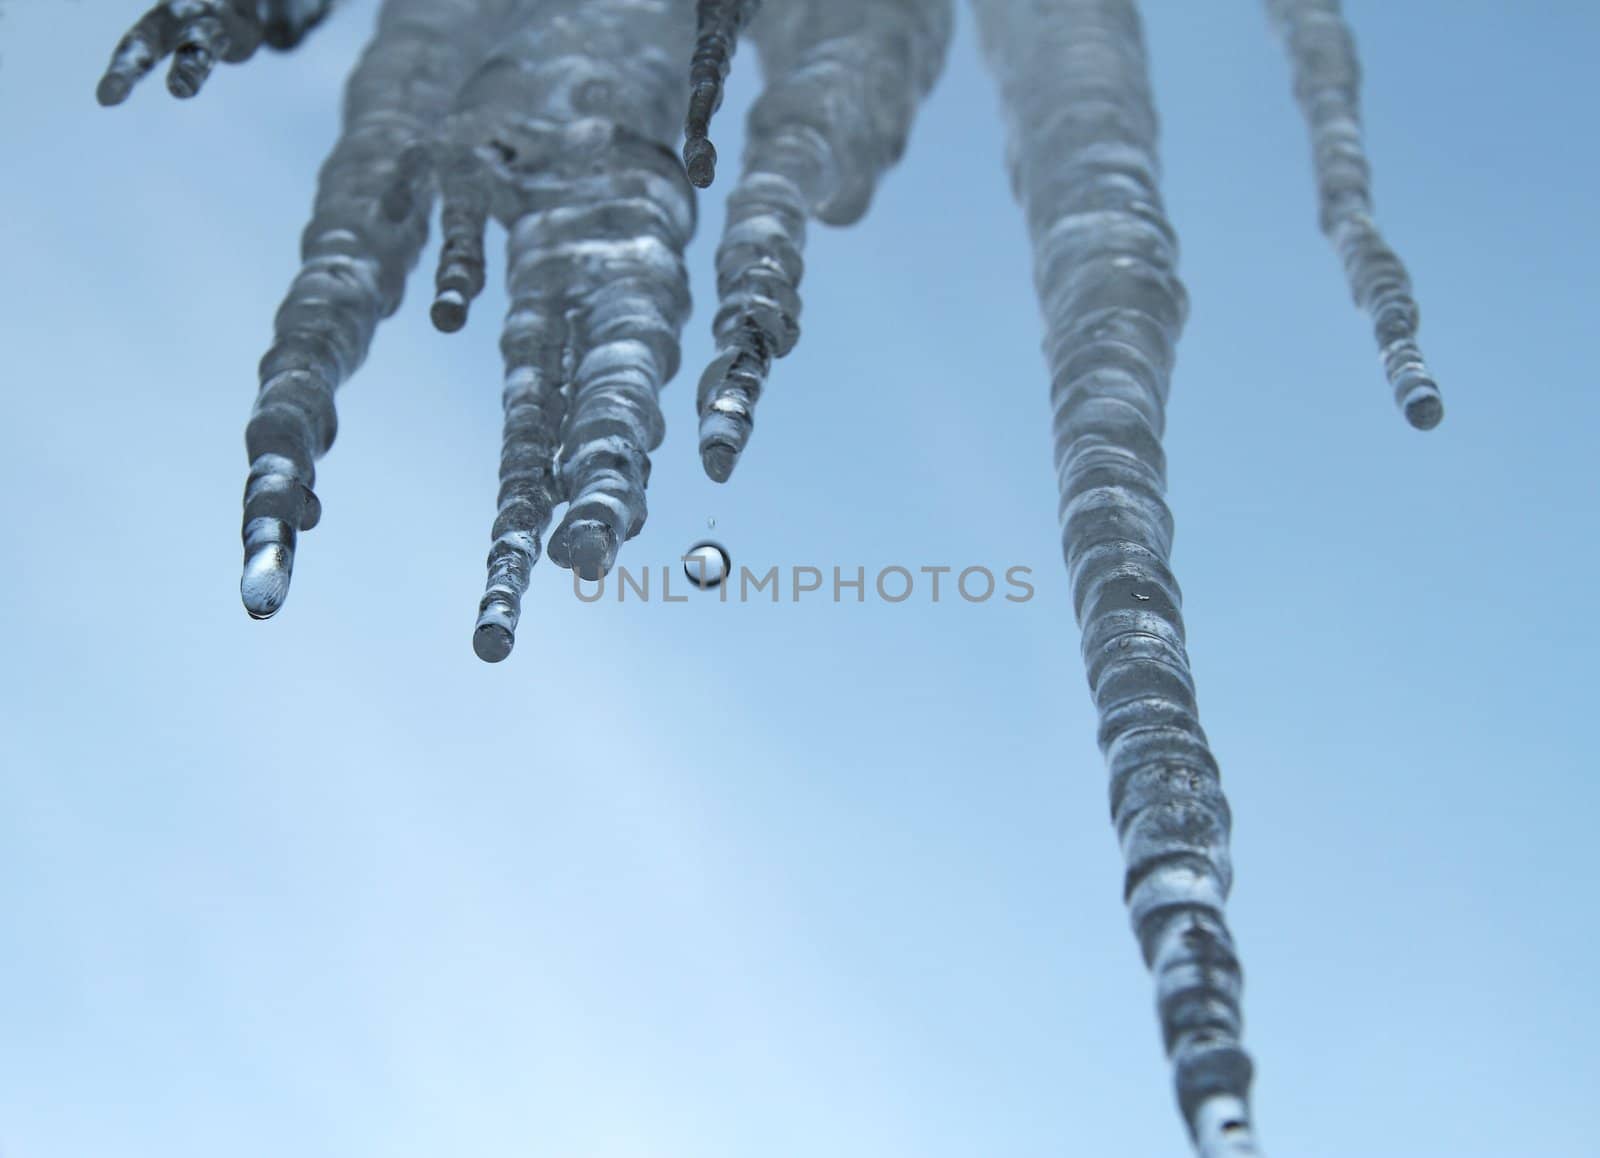 Icicles hanging in front of a blue sky with melt water dripping off of them.